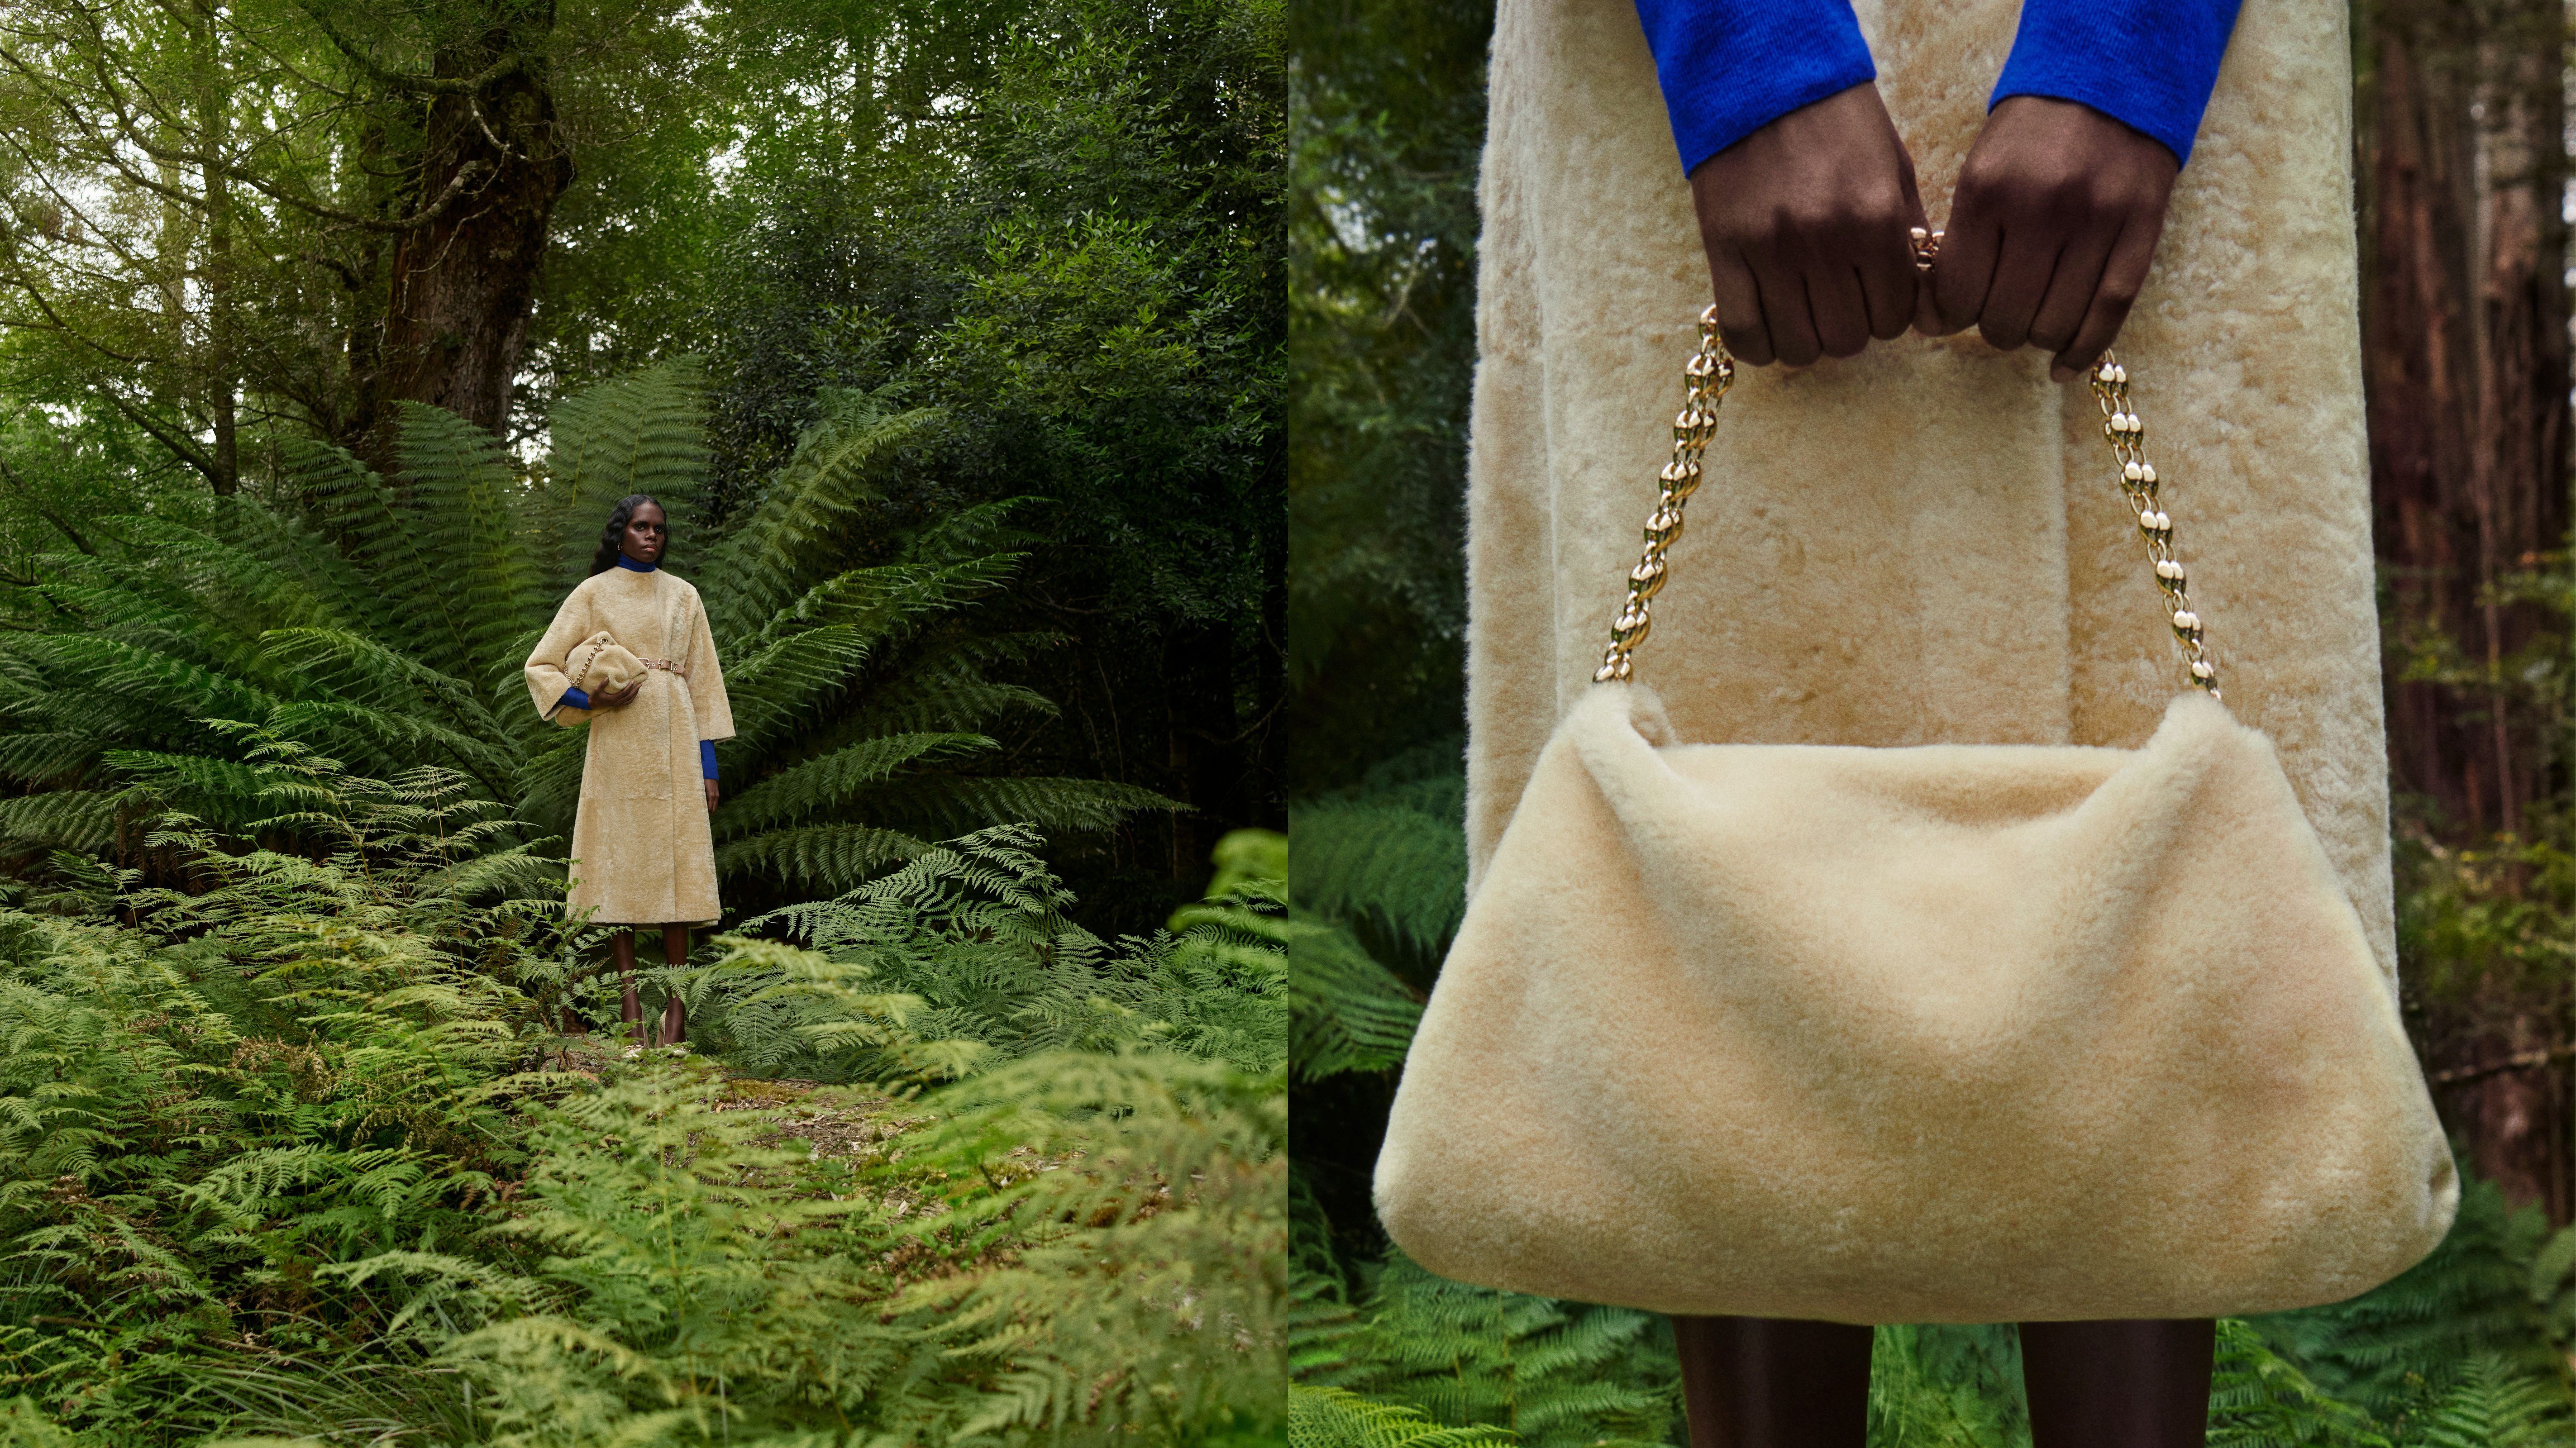 Tarlisa Gaykamangu standing in the forest wearing a yellow shearling coat with matching bag